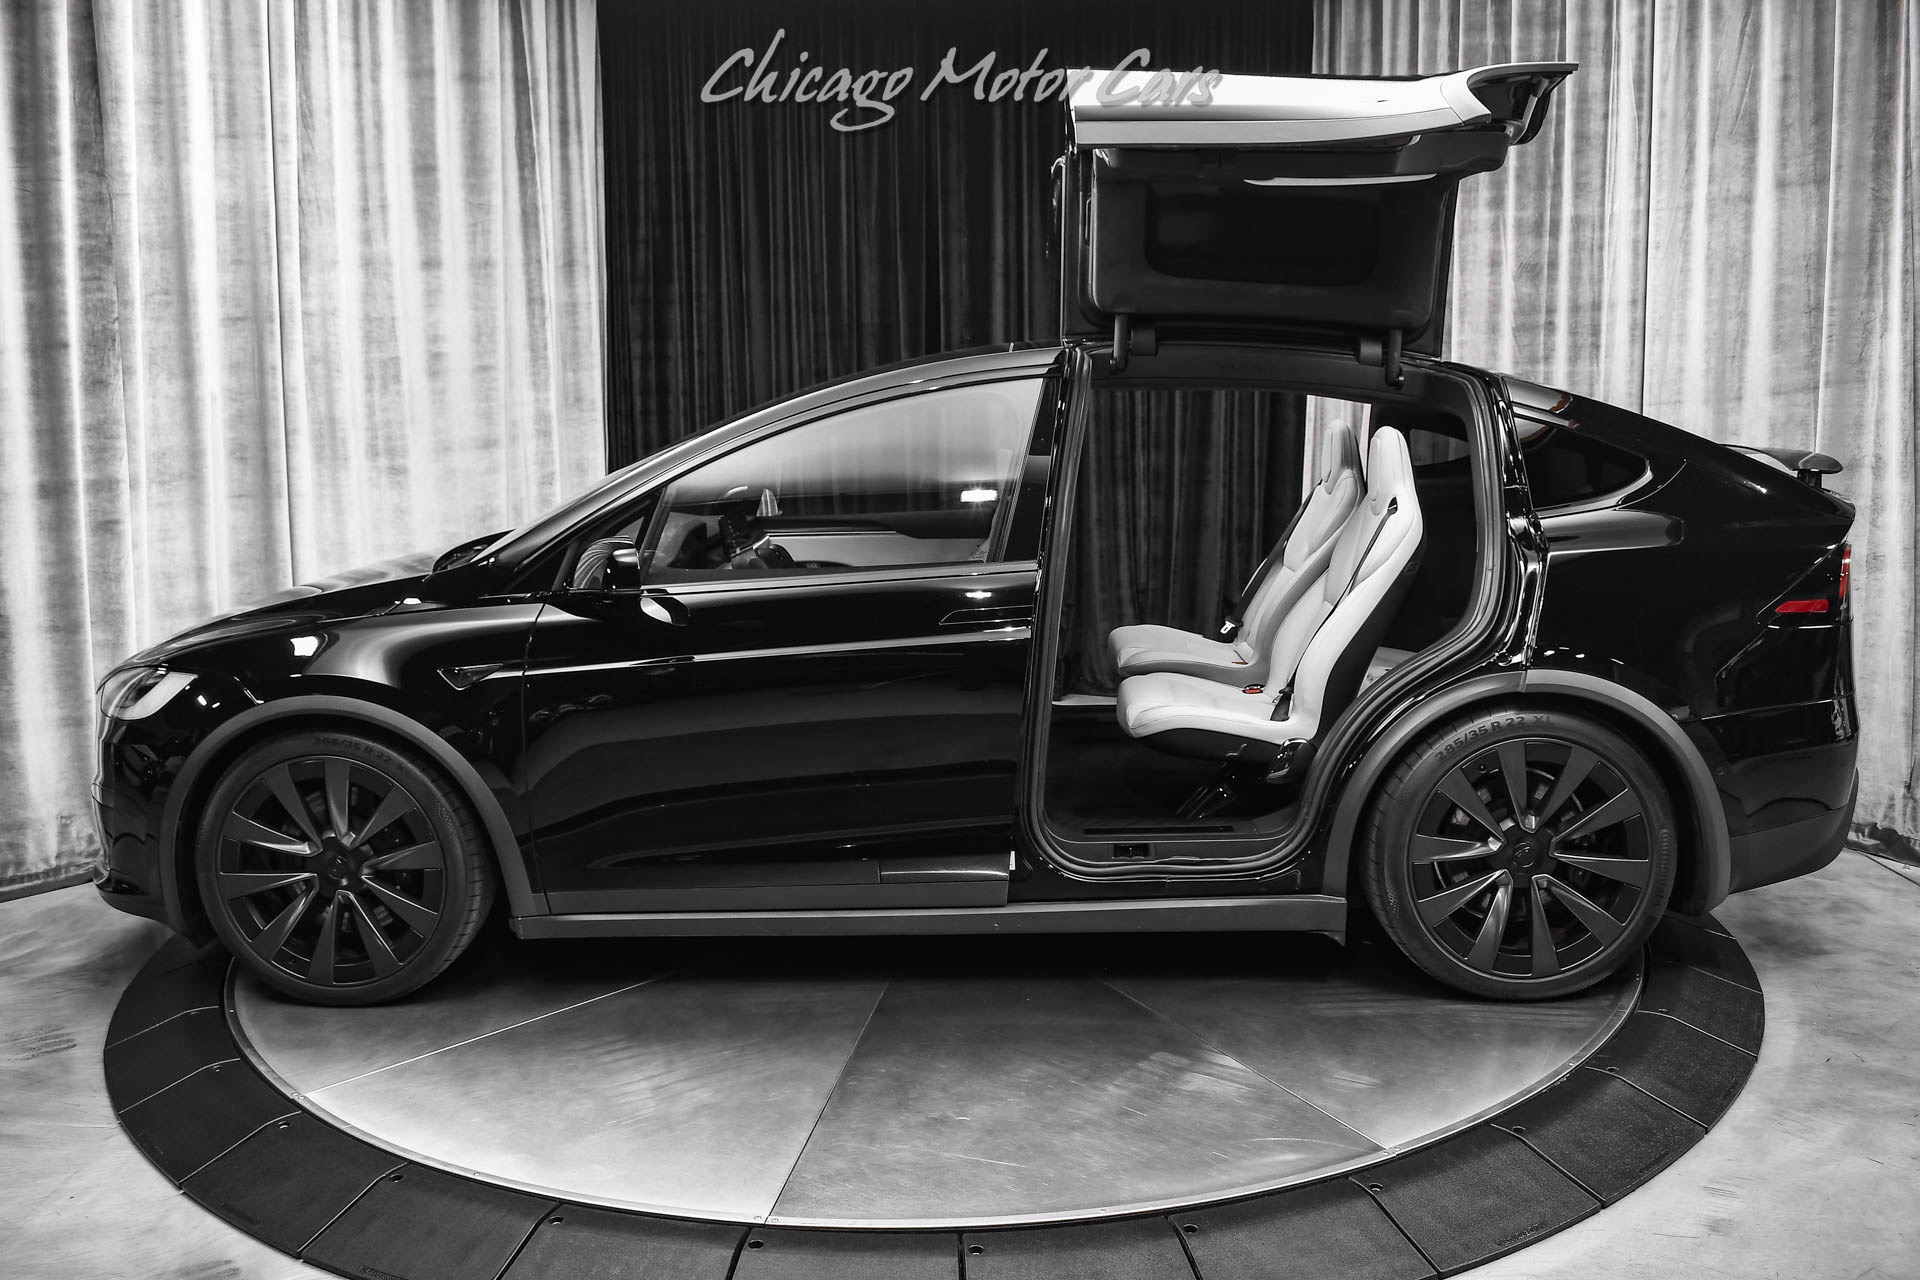 Used-2022-Tesla-Model-X-Plaid-SUV-Autopilot-ONLY-5K-Miles-6-Seat-Layout-Quickest-Production-SUV